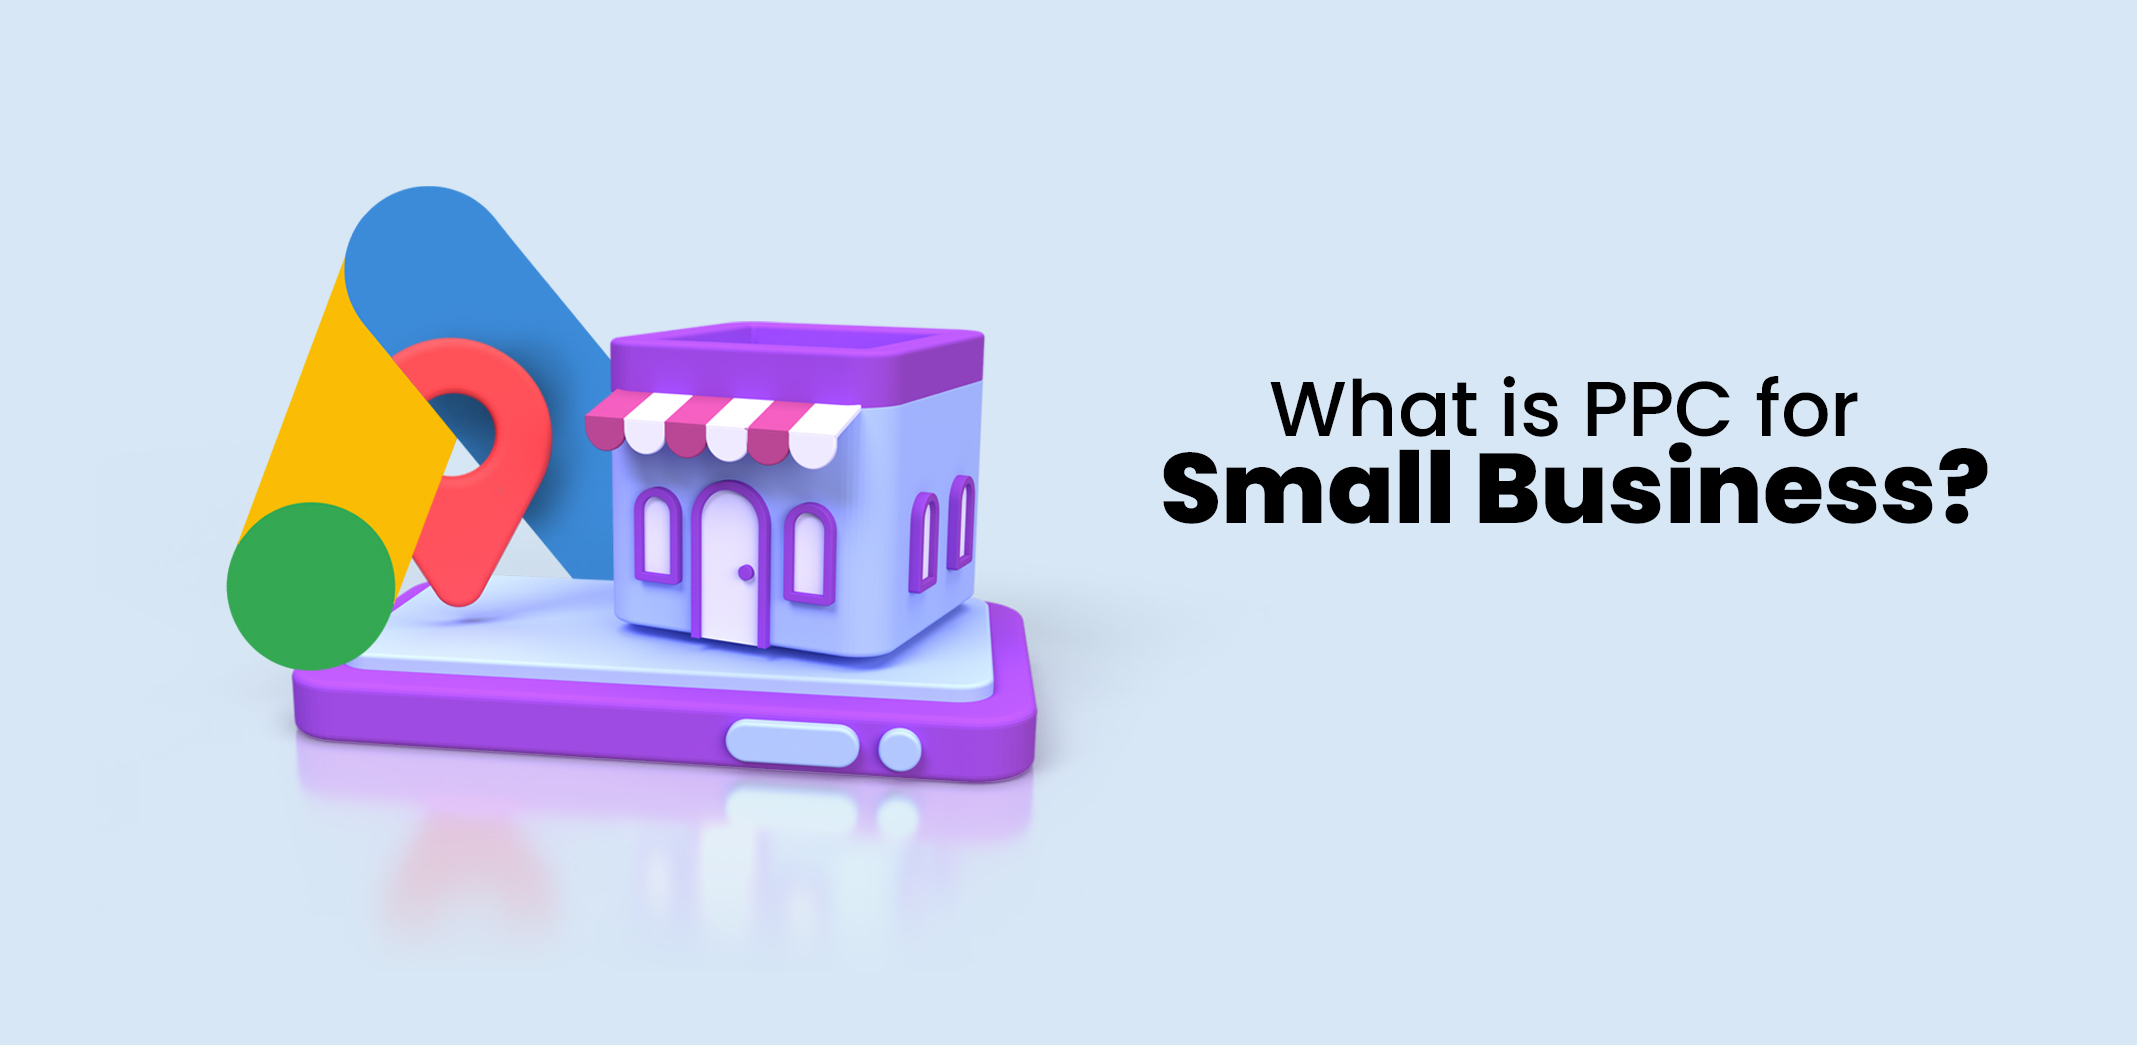 What is PPC for Small Business?